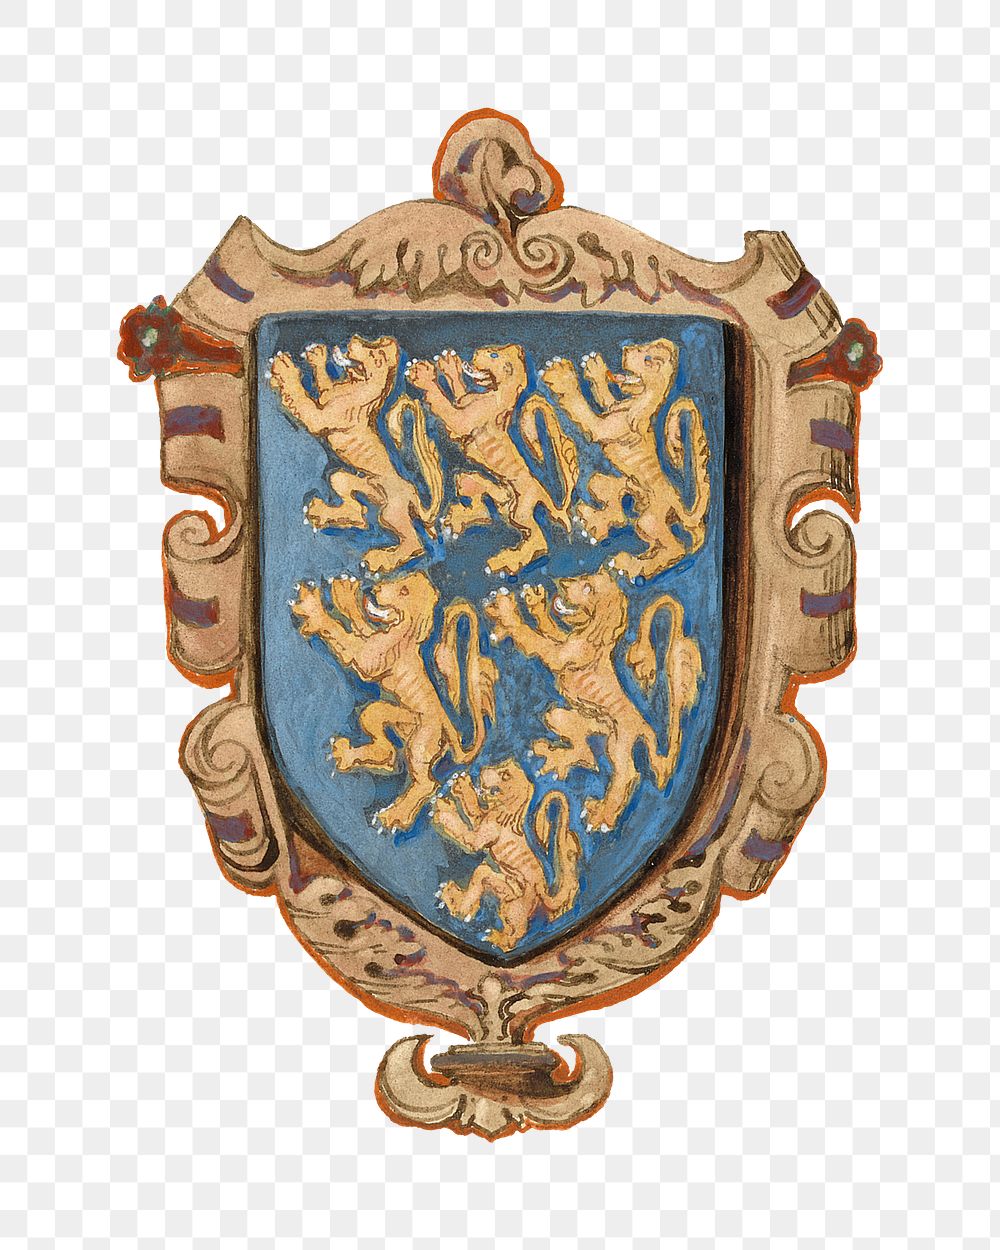 PNG Medieval coat of arm, illustration by Rev. James Bulwer, transparent background.  Remixed by rawpixel. 